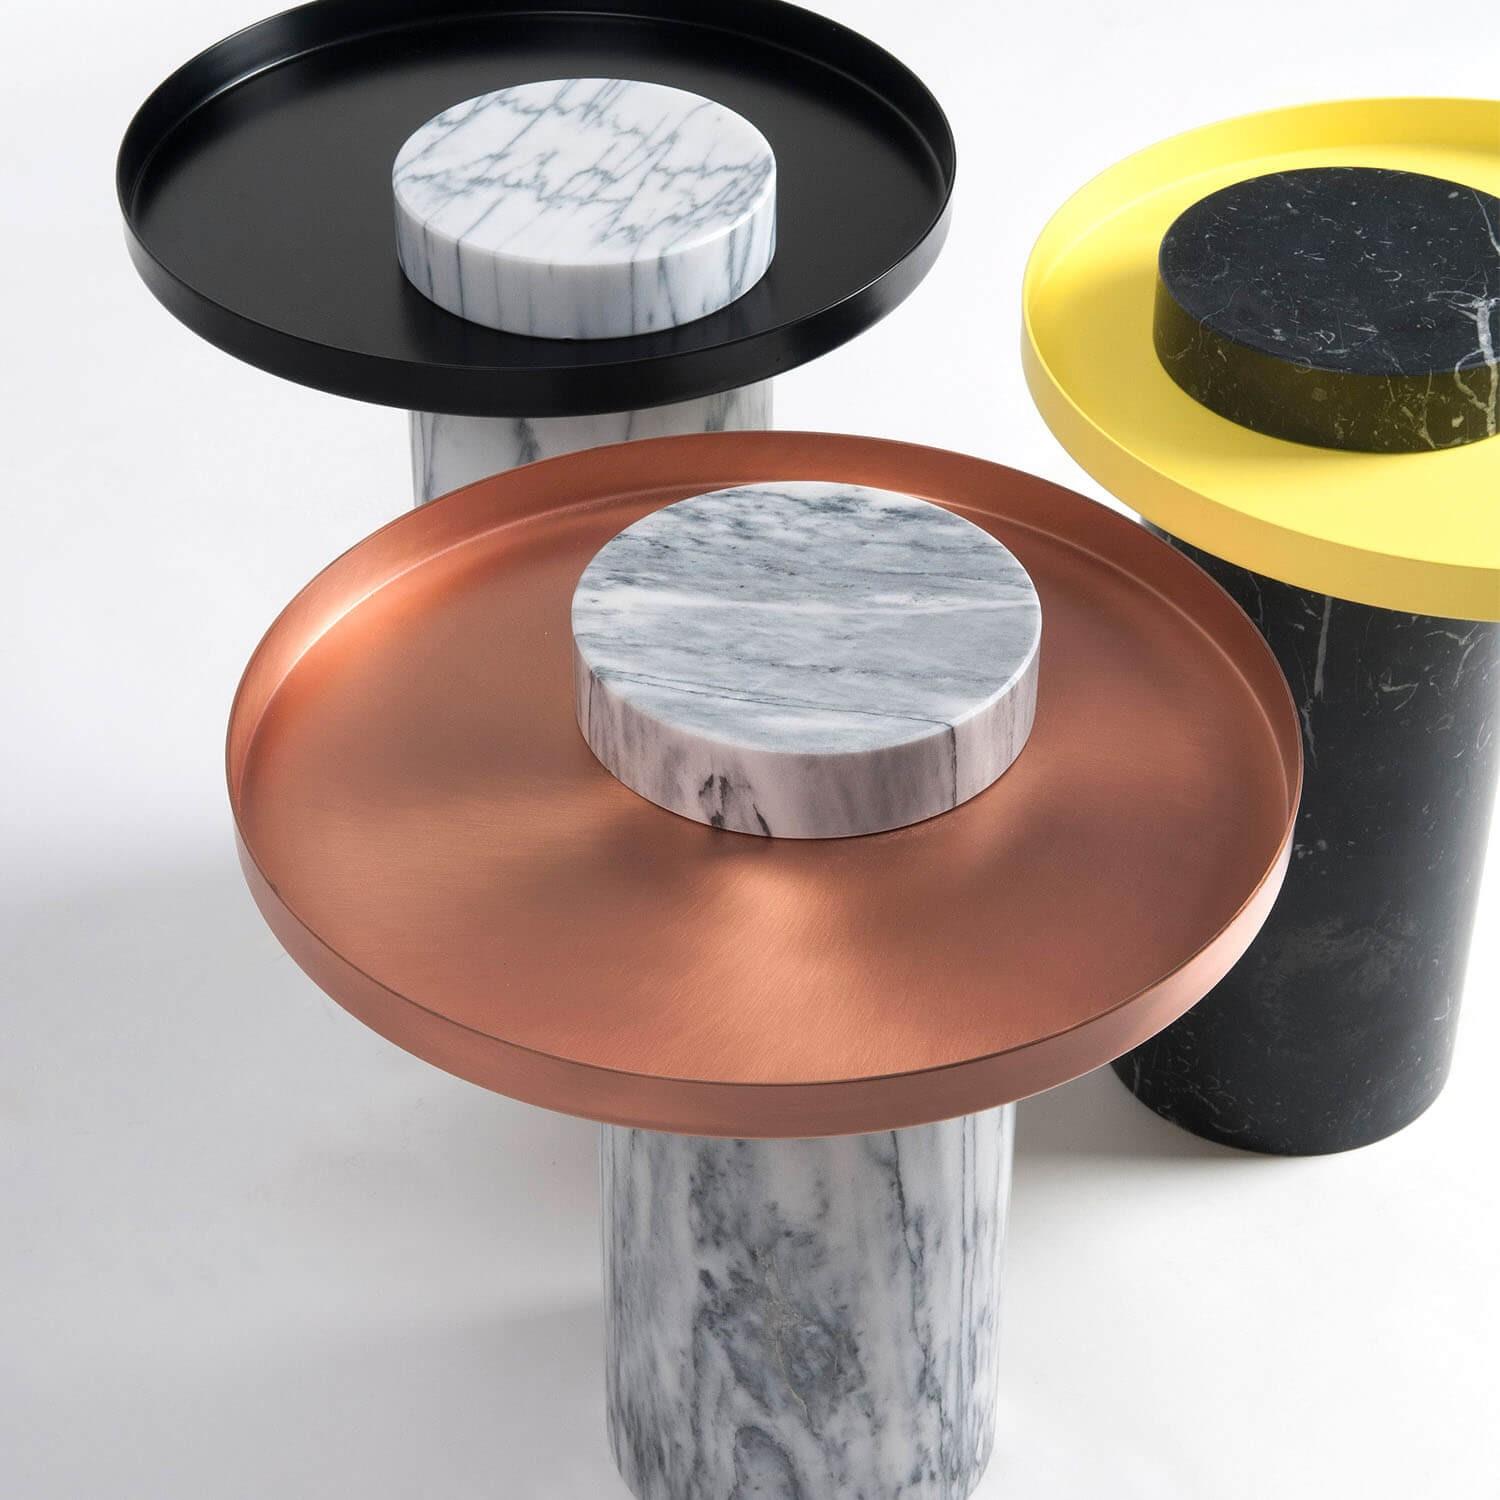 Marble contemporary coffee table - Sebastian Herkner

The Salute table exists in 3 sizes, 3 different marbles for the column and 4 different finishes for the tray for a virtually endless number of configurations. In addition, Salute can be made